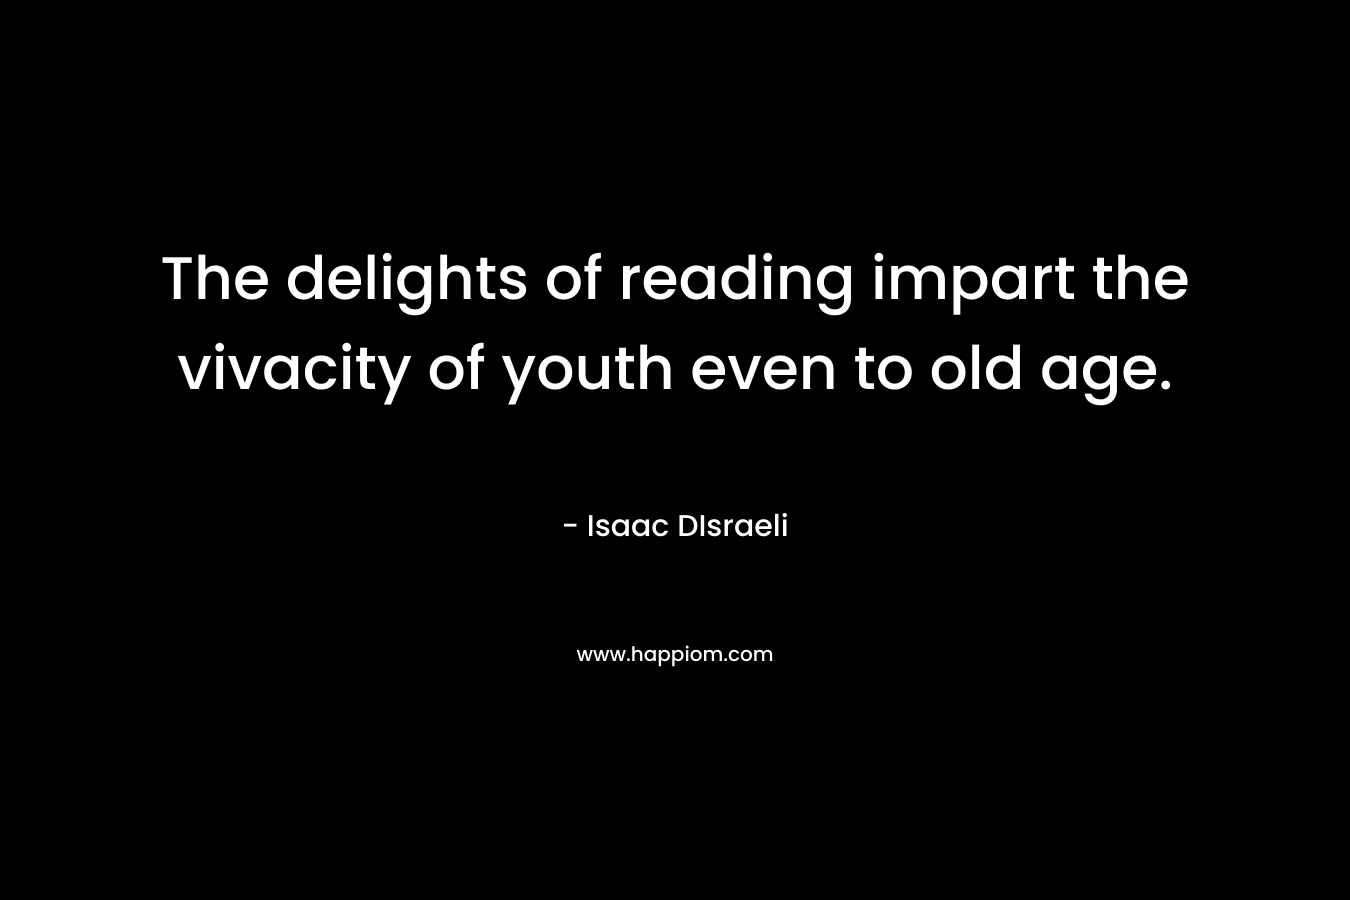 The delights of reading impart the vivacity of youth even to old age. – Isaac DIsraeli